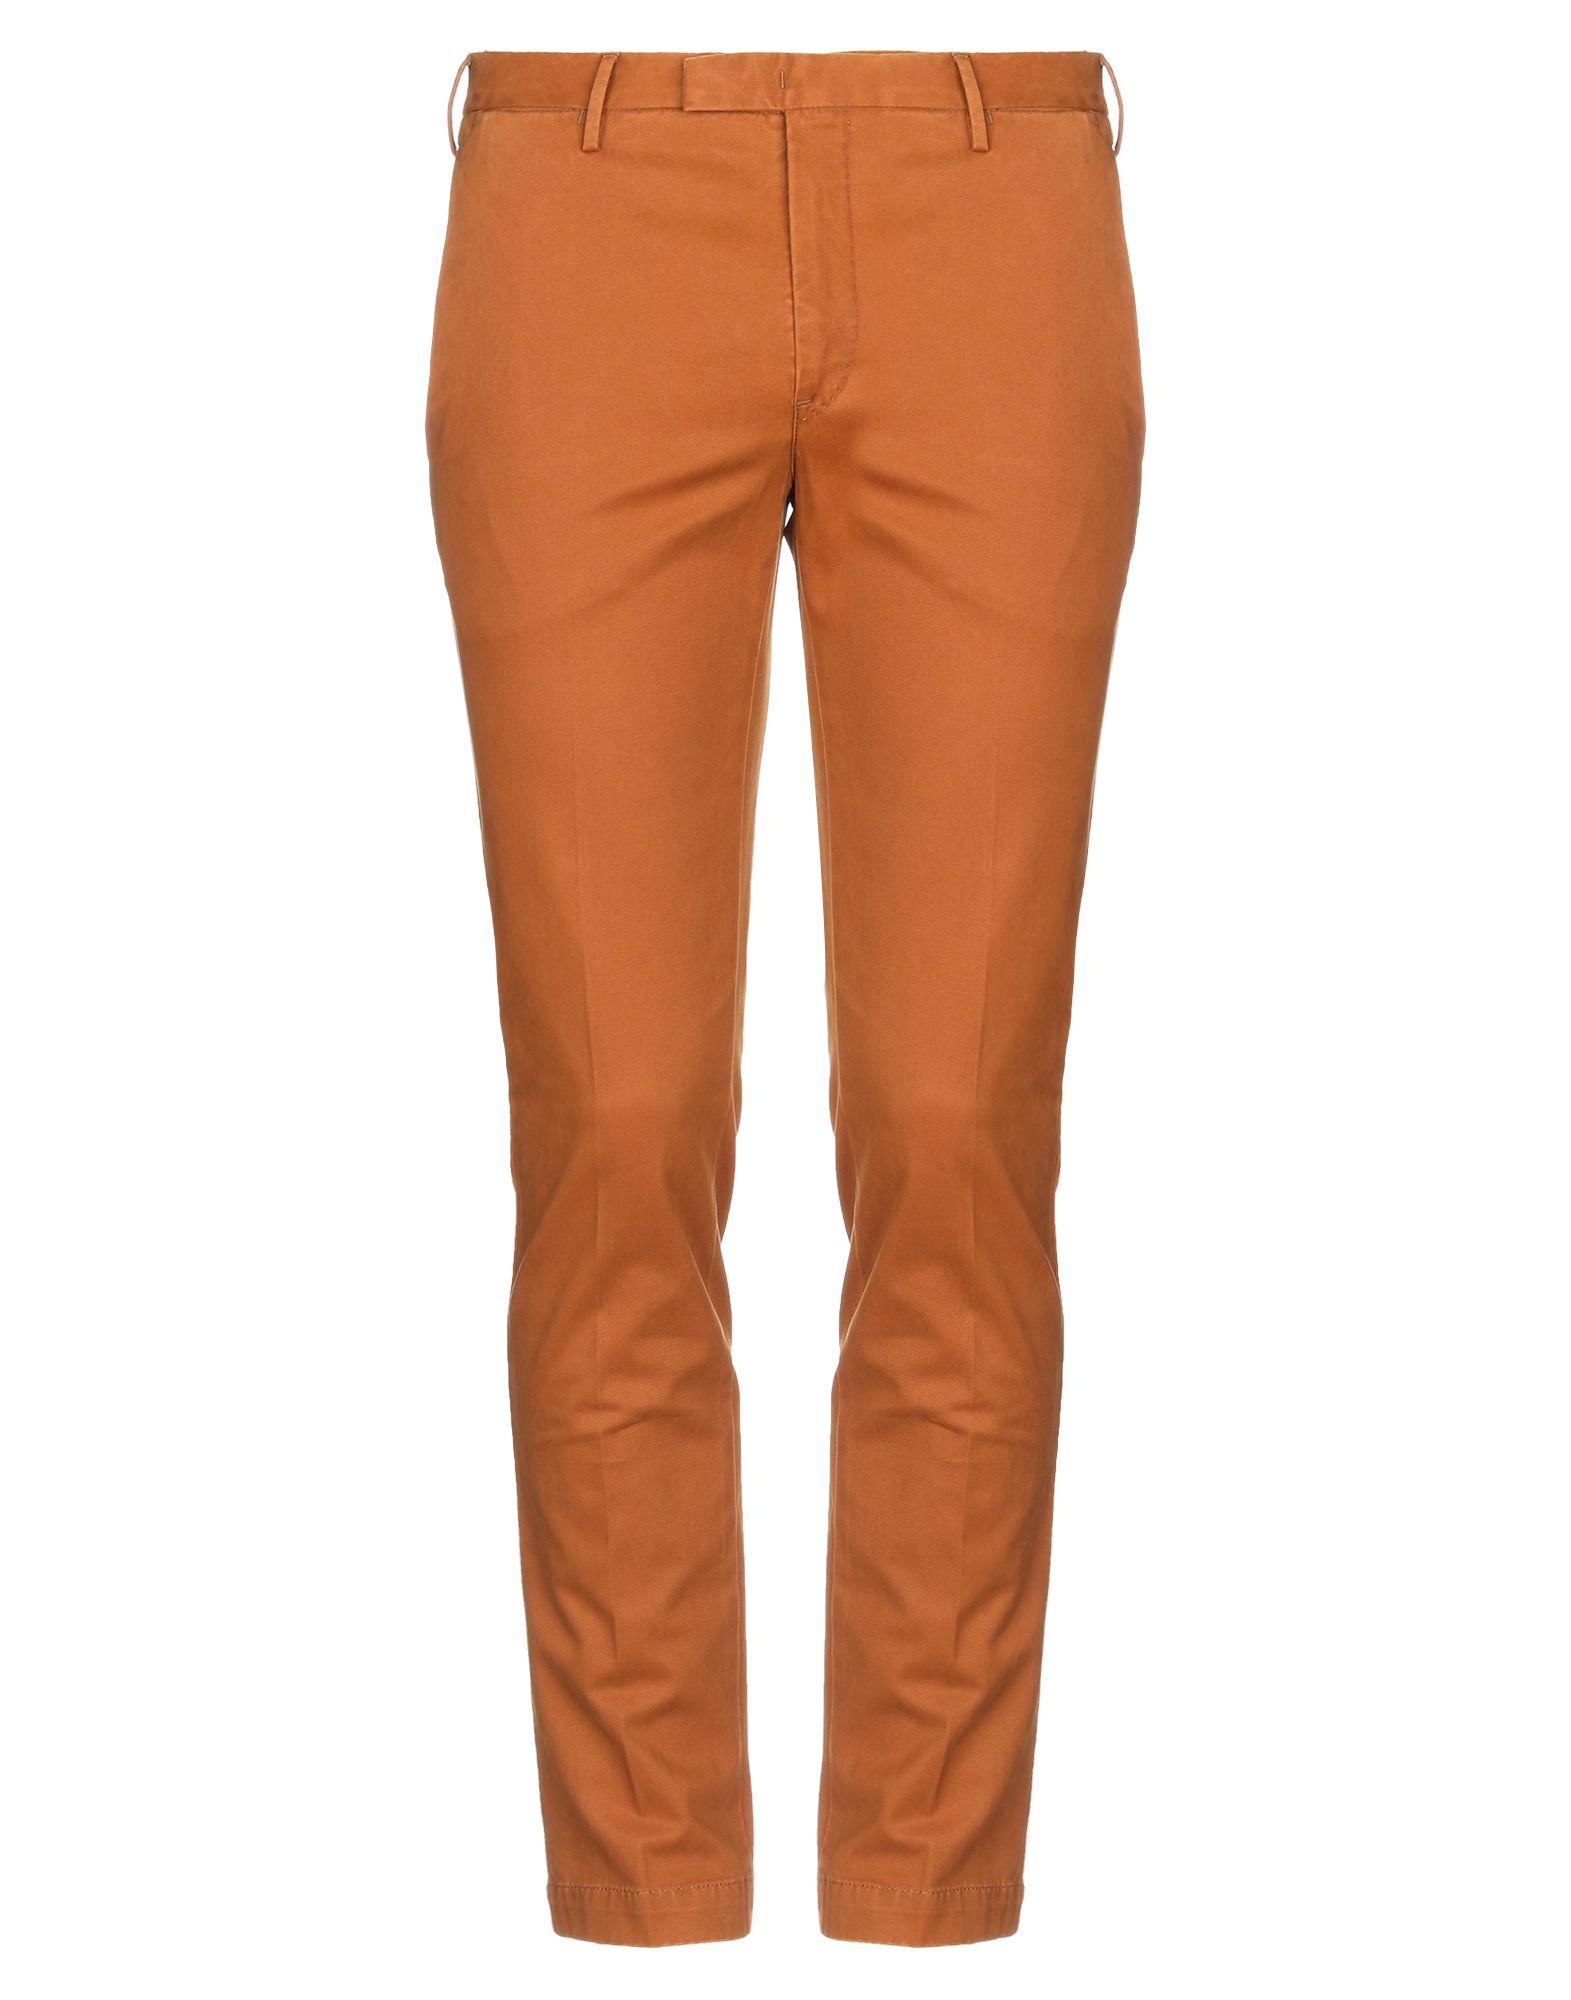 PT01 Cotton Casual Pants in Brown for Men - Lyst